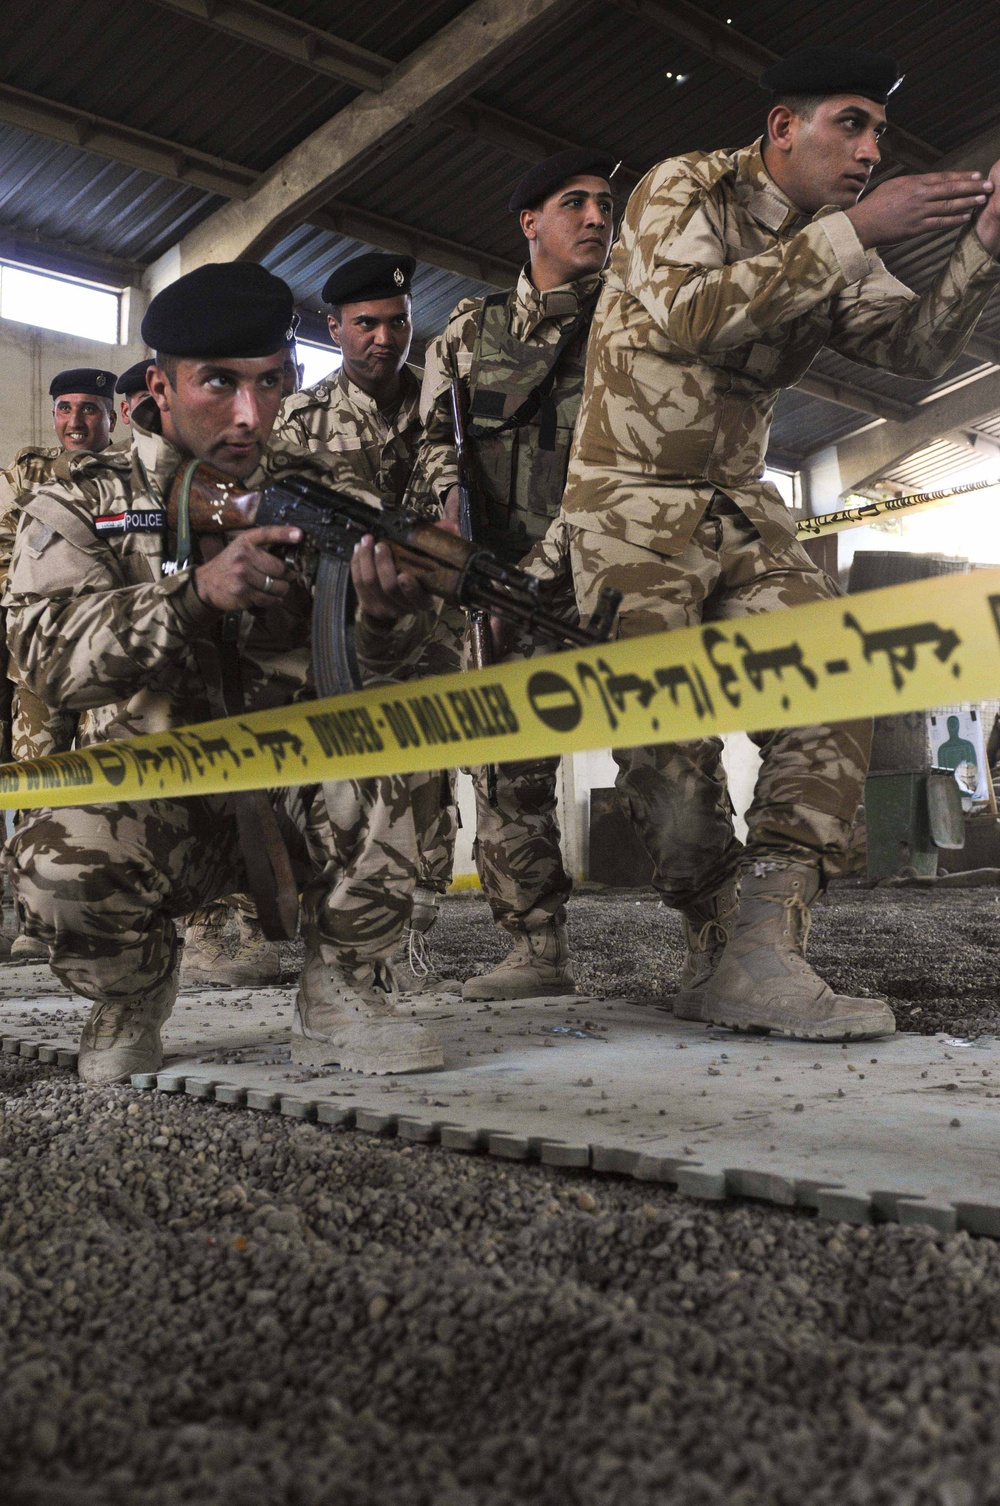 USD-C Soldiers train first Iraqi SWAT team in history of country